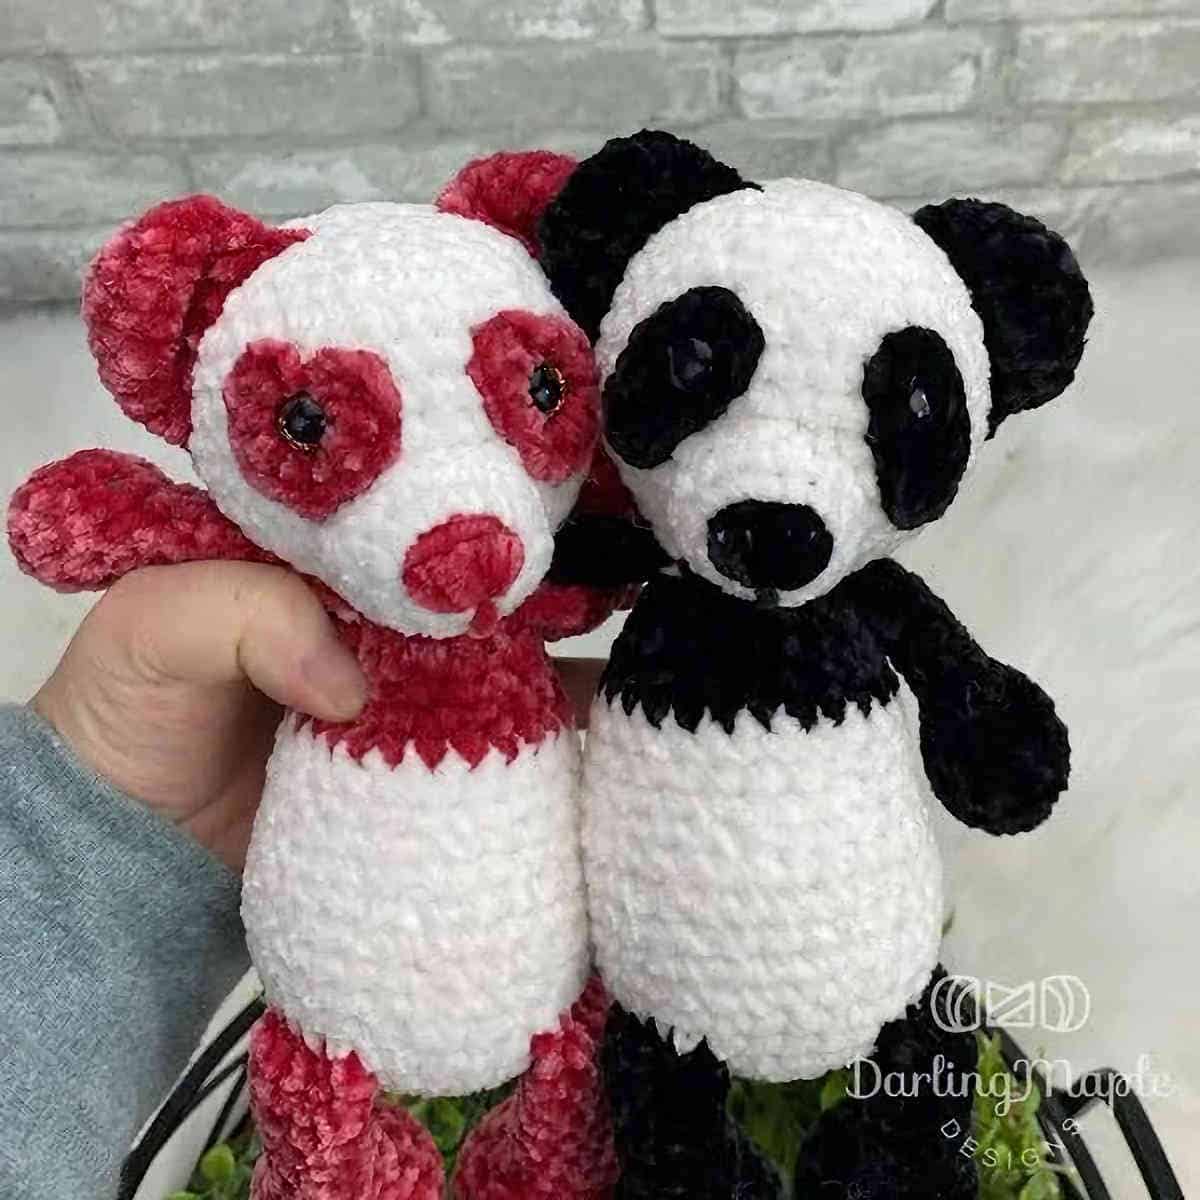 Two crocheted panda toys held by hand.